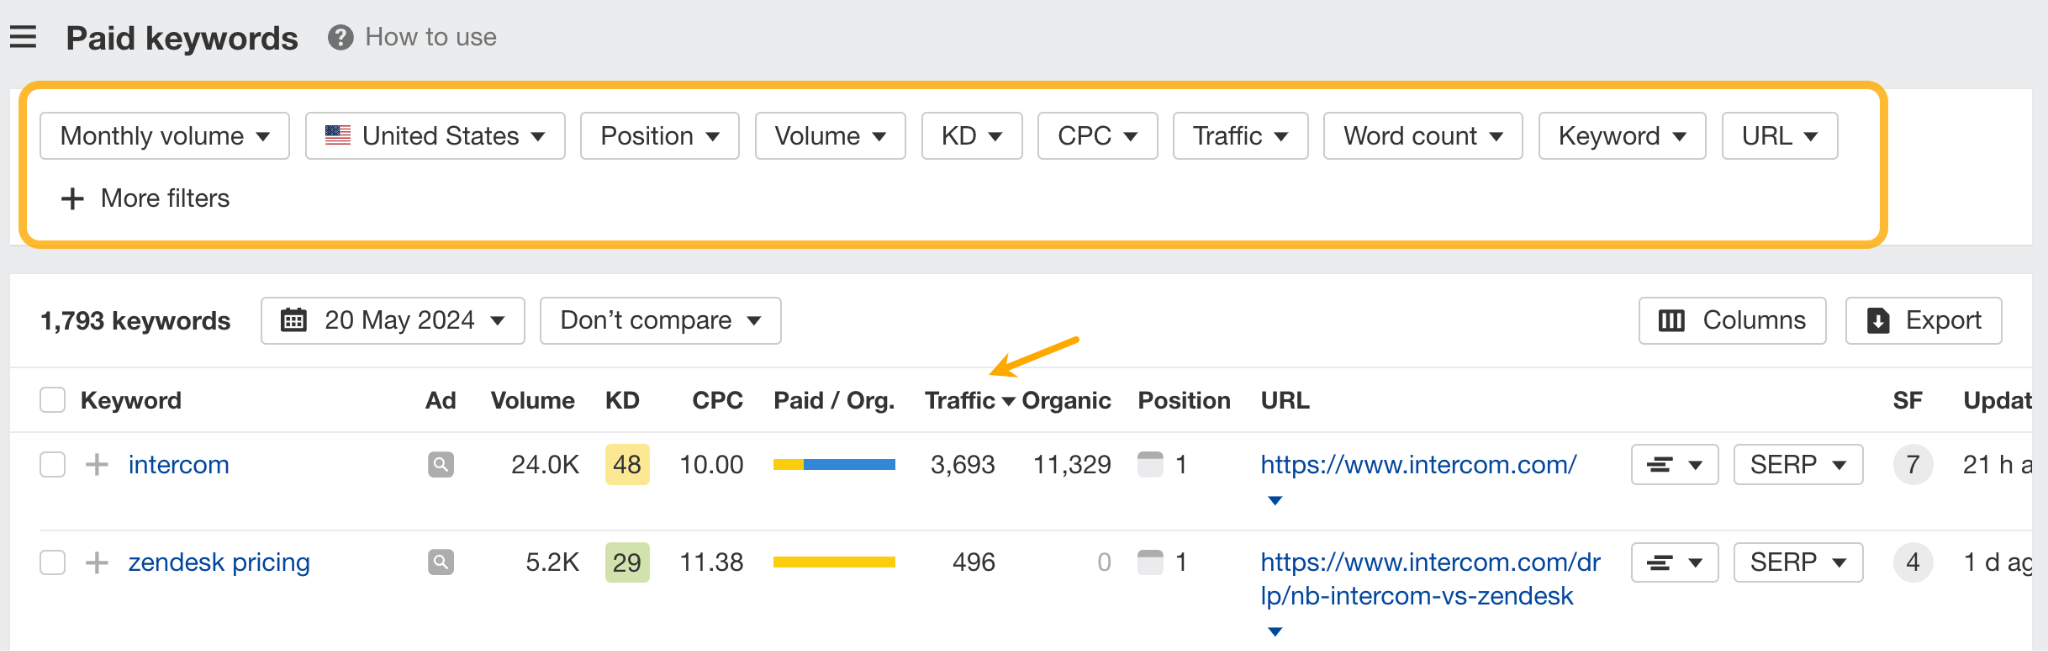 Filters in paid keywords report. 